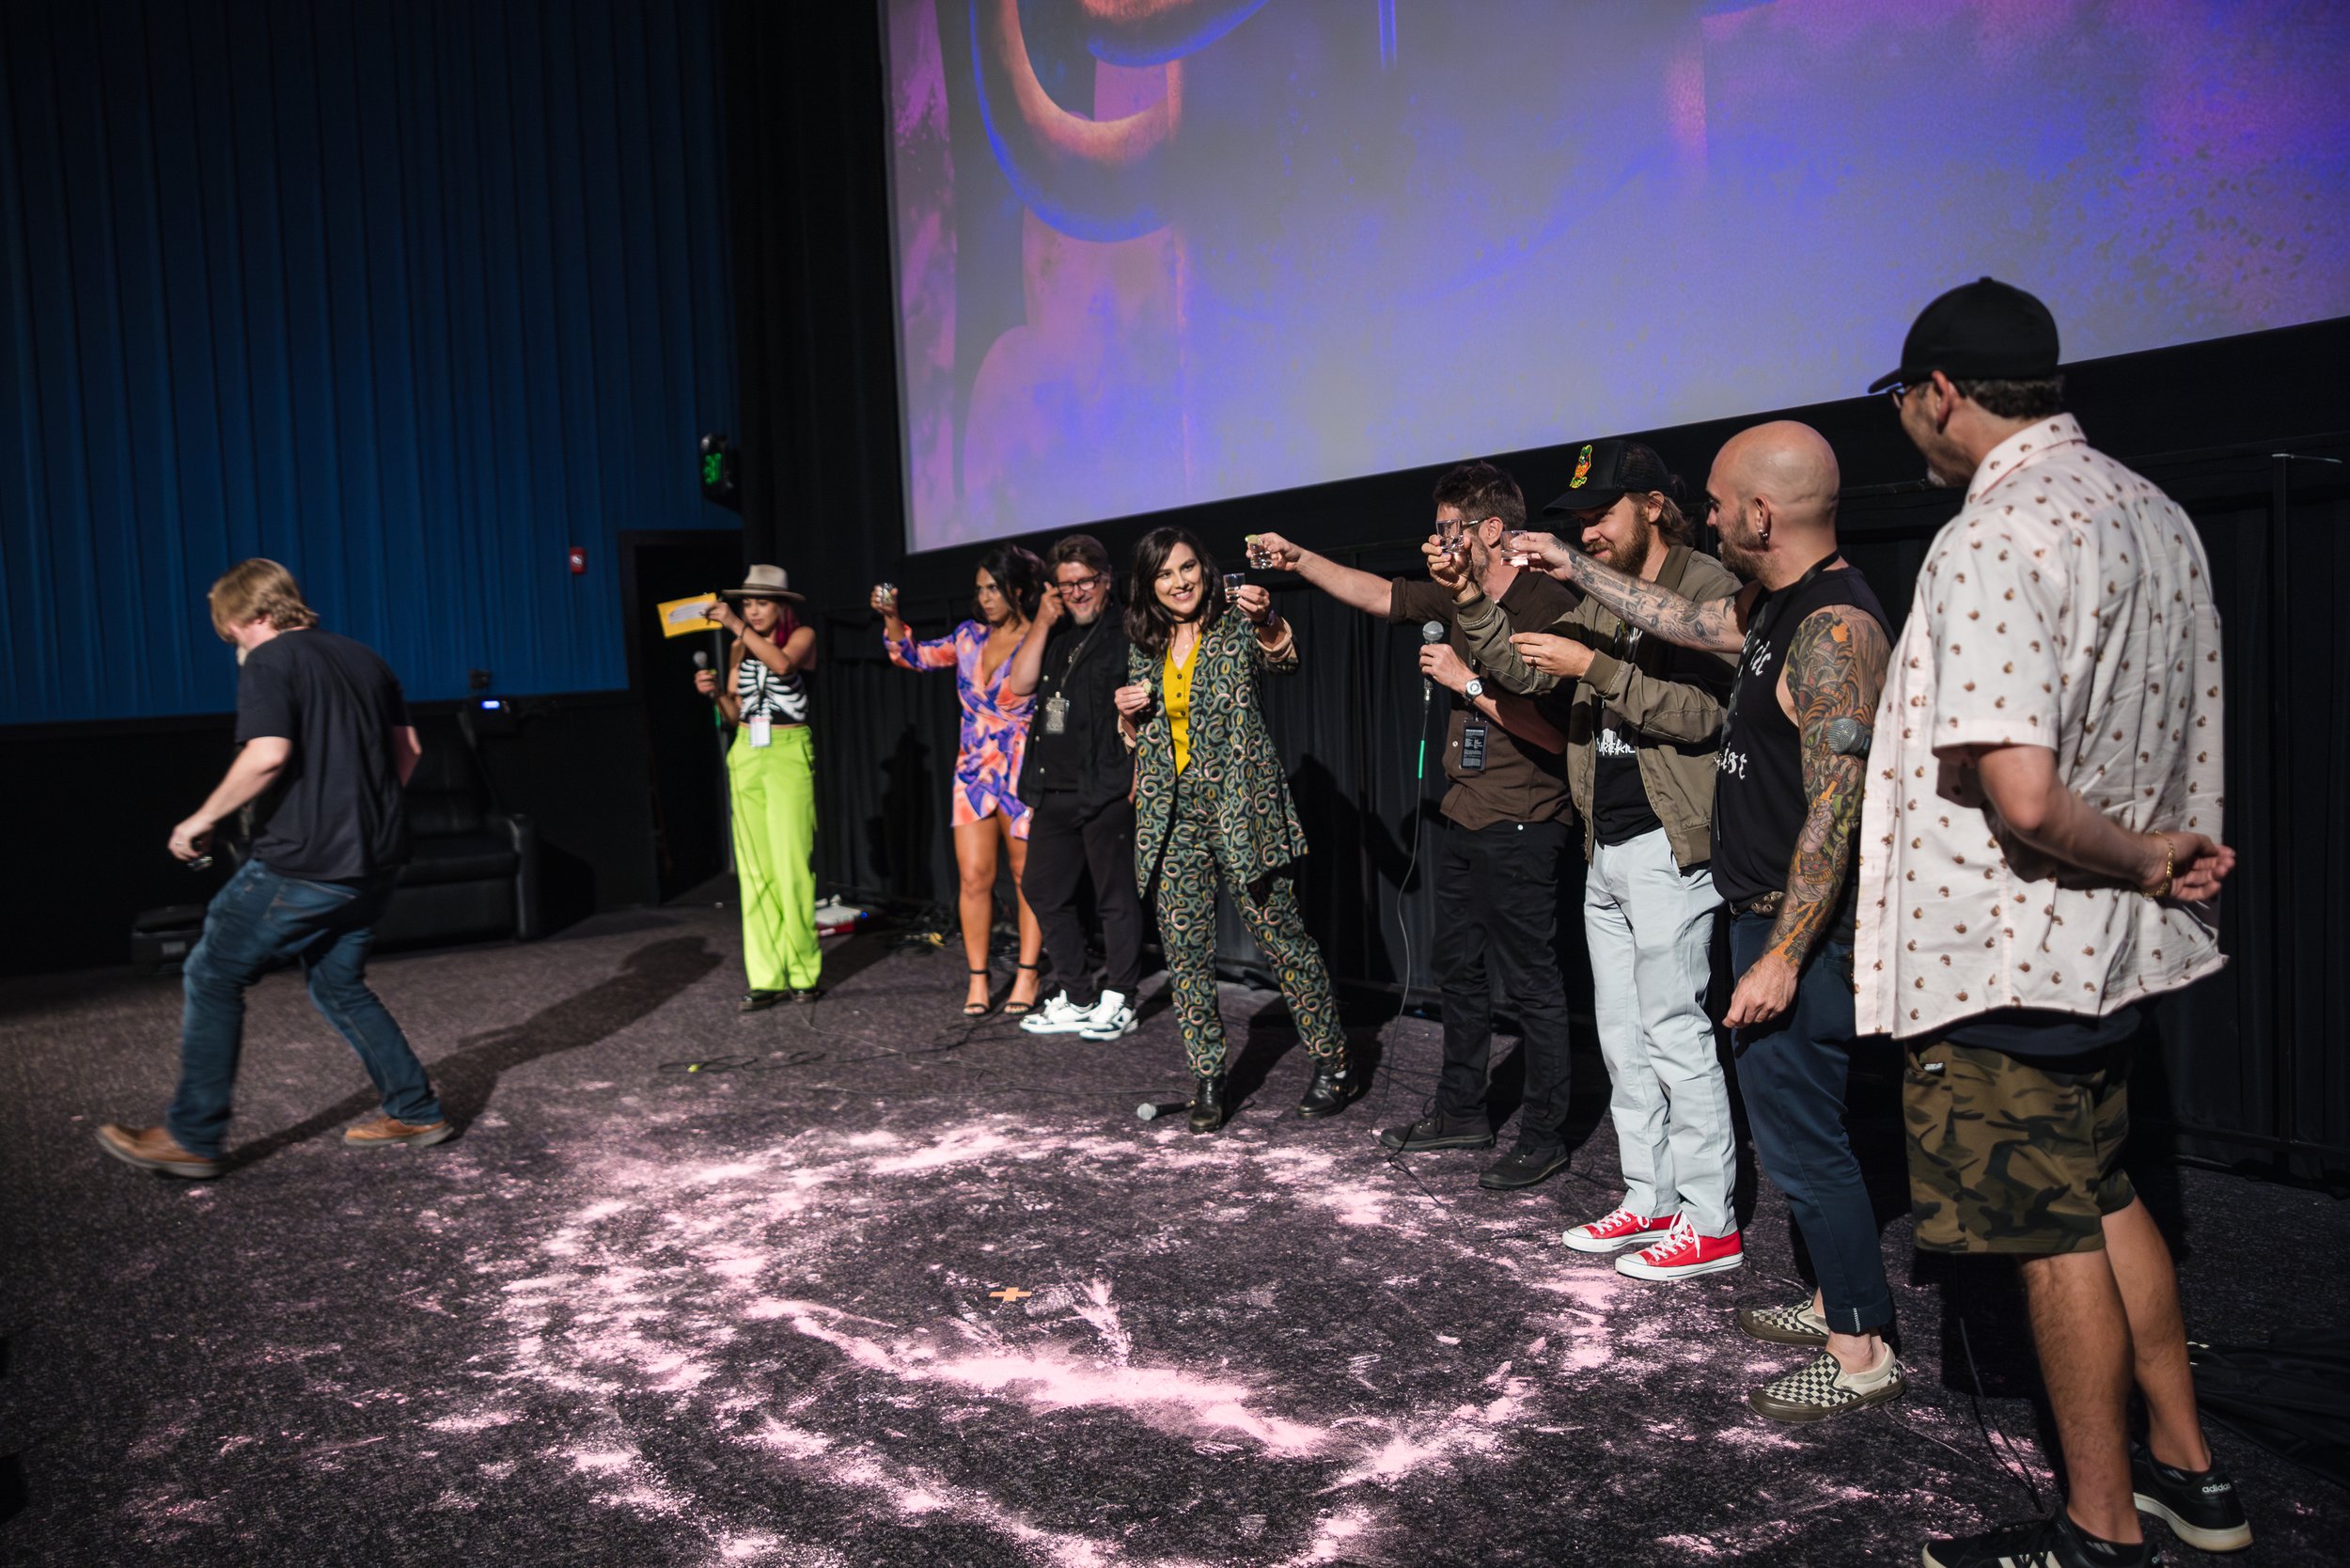   V/H/S 85  Q&amp;A event Courtesy of Fantastic Fest, Photo: Heather Kennedy 